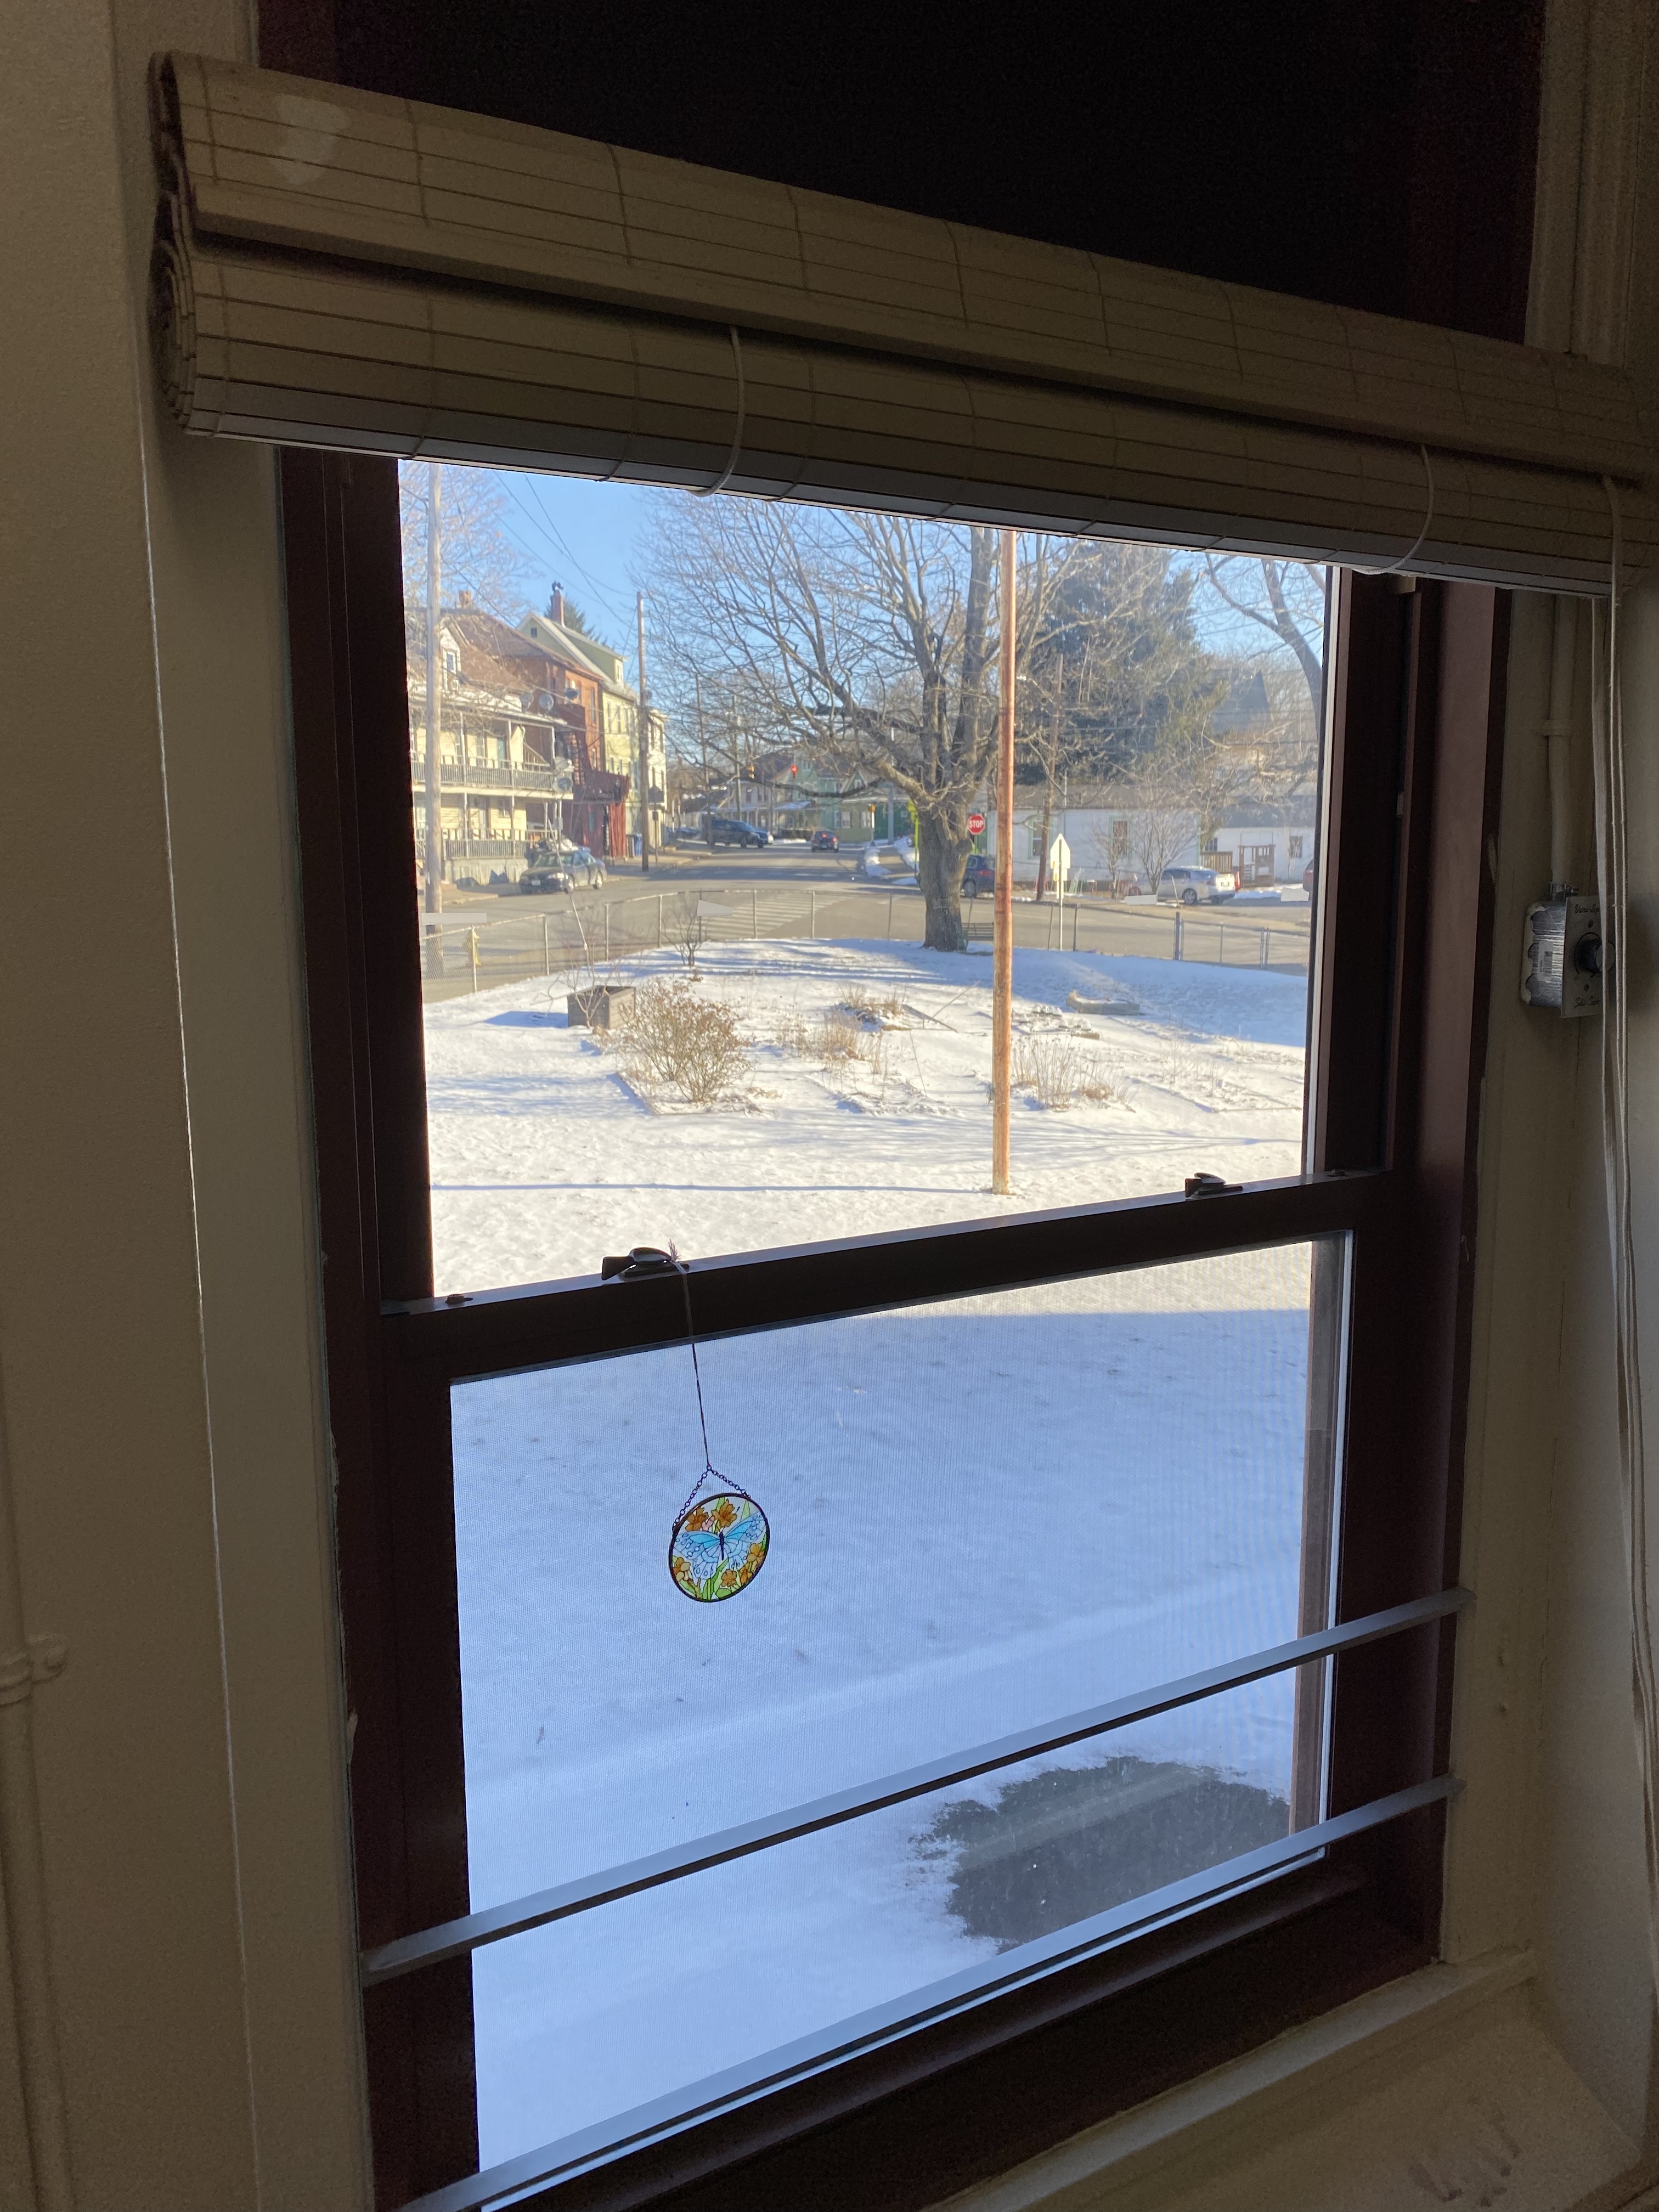 This is an image of a window and it’s view of a snowy landscape surrounded by a fence with a street on the other side of the fence. 
